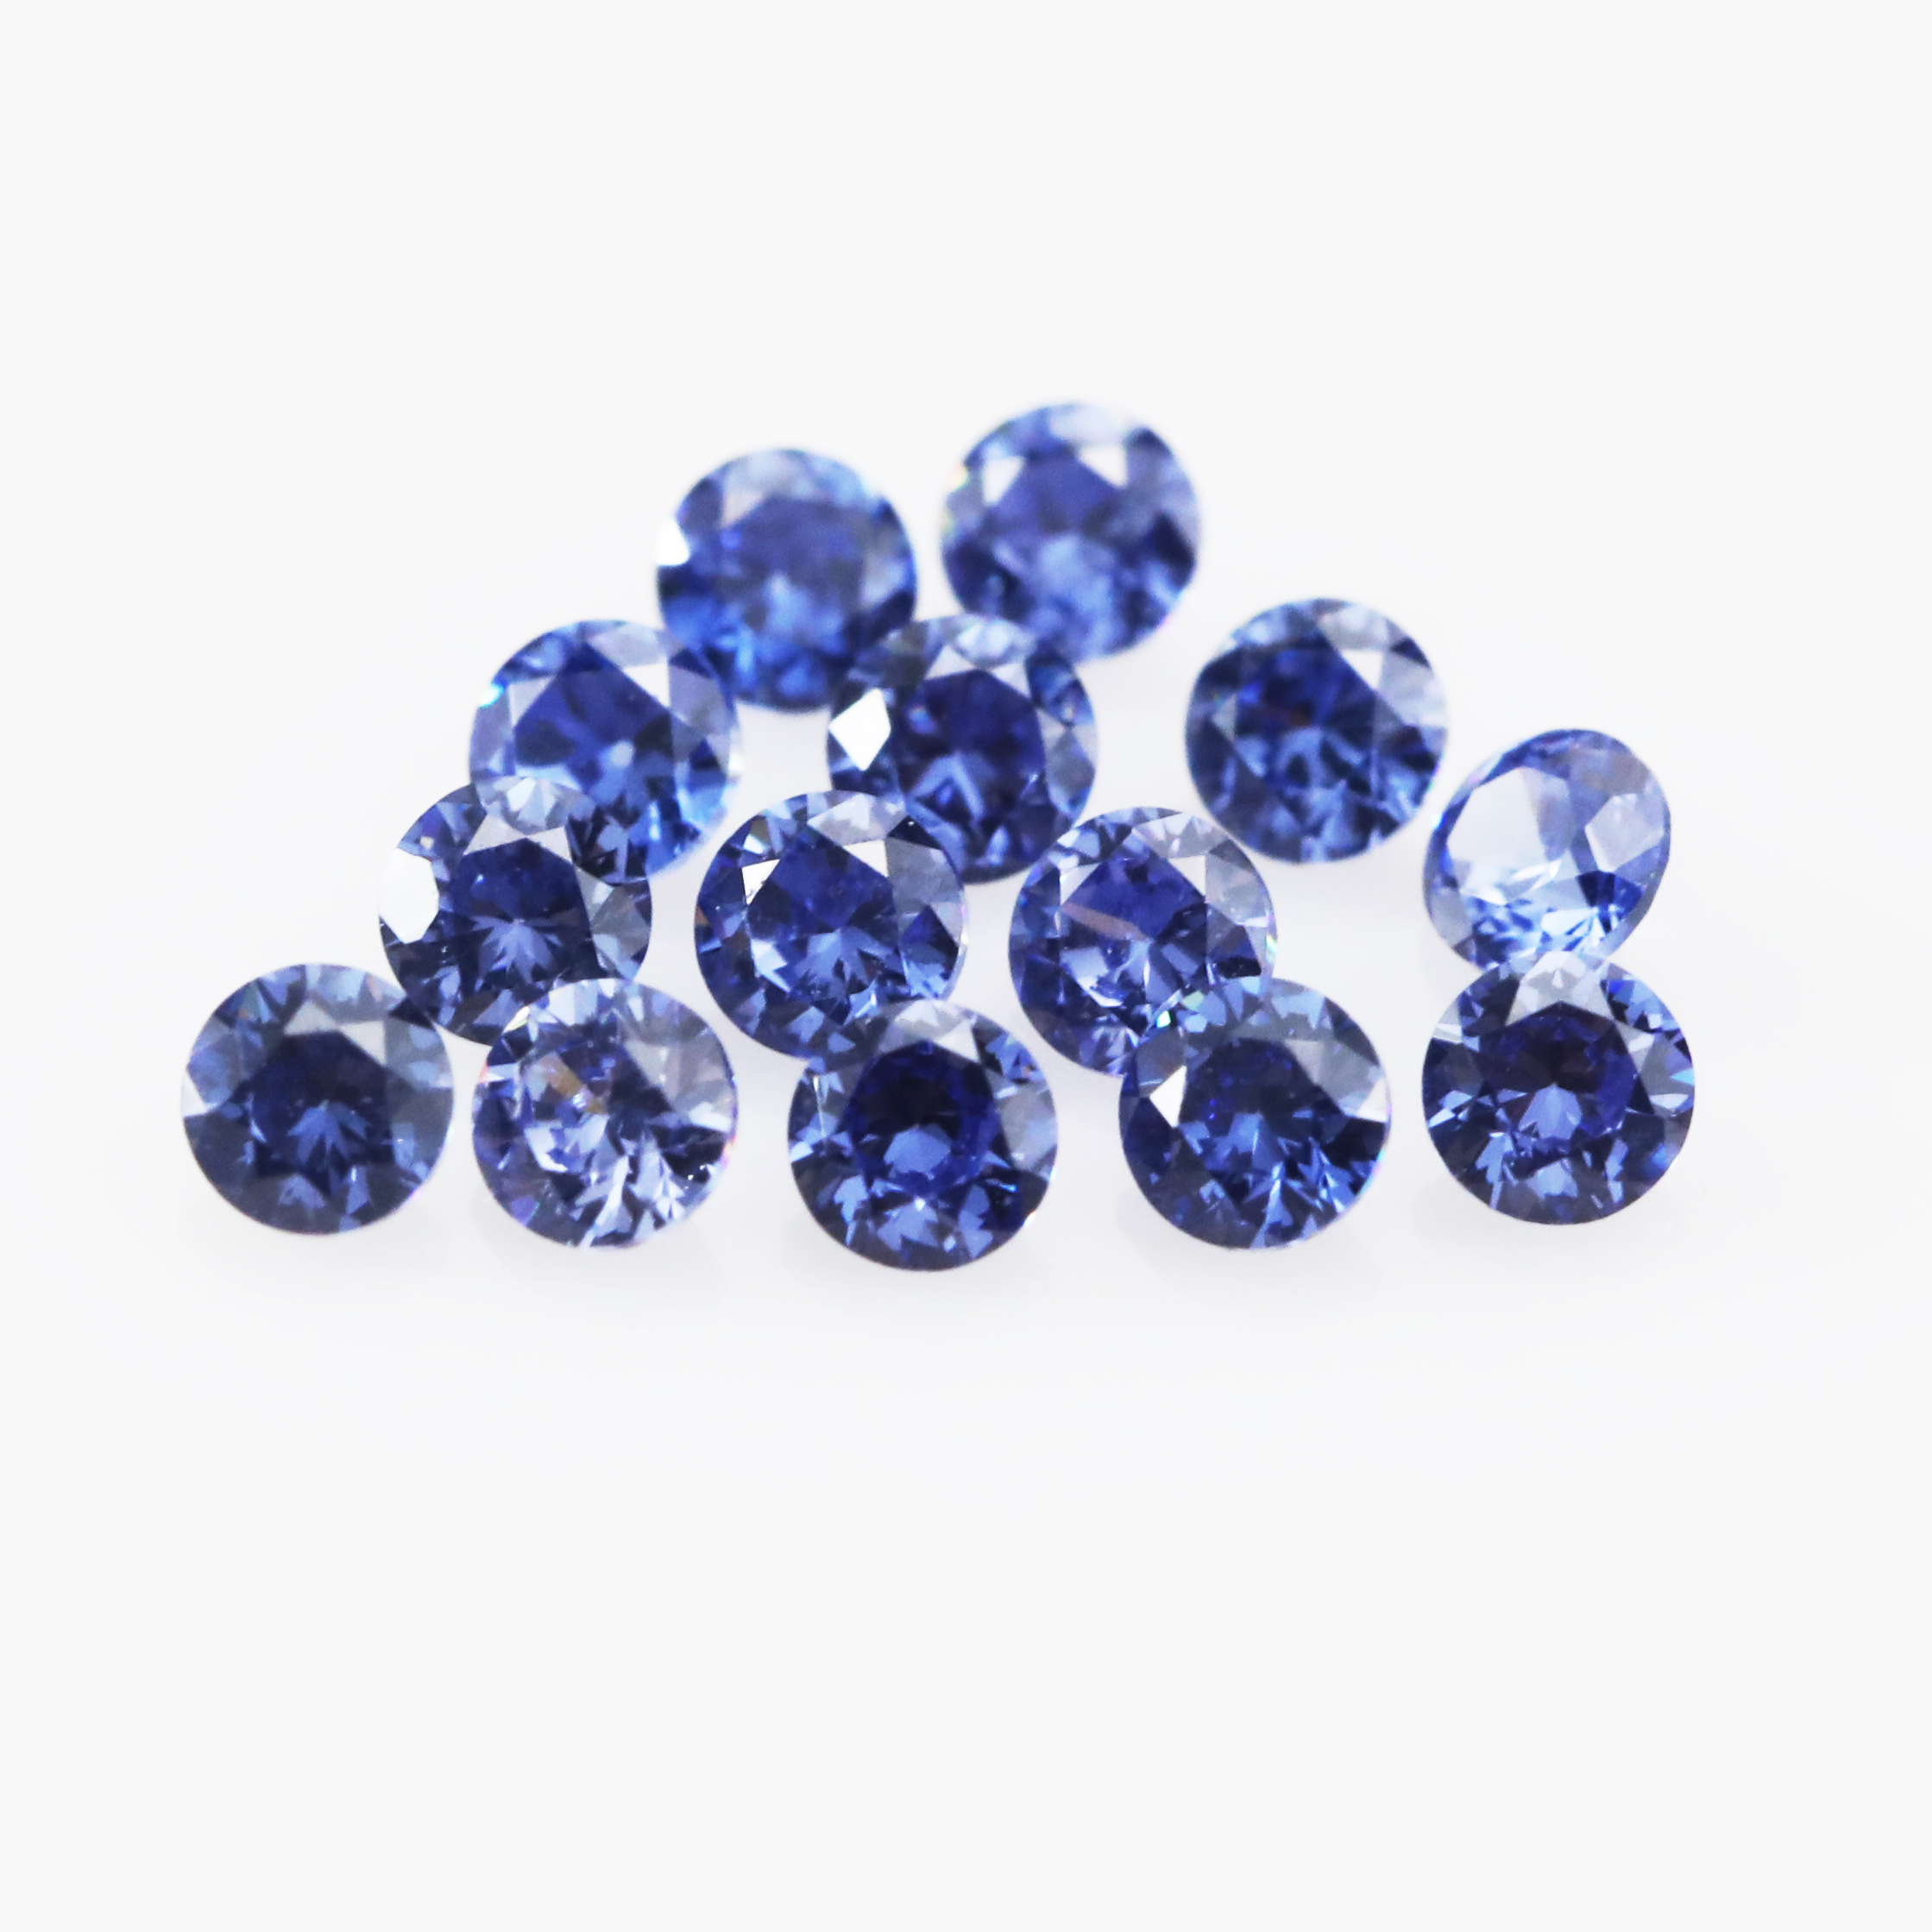 5Pcs March May December Imitation Birthstone Round Faceted Cubic Zirconia CZ Stone DIY Loose Stone Supplies 4110183-2 - Click Image to Close